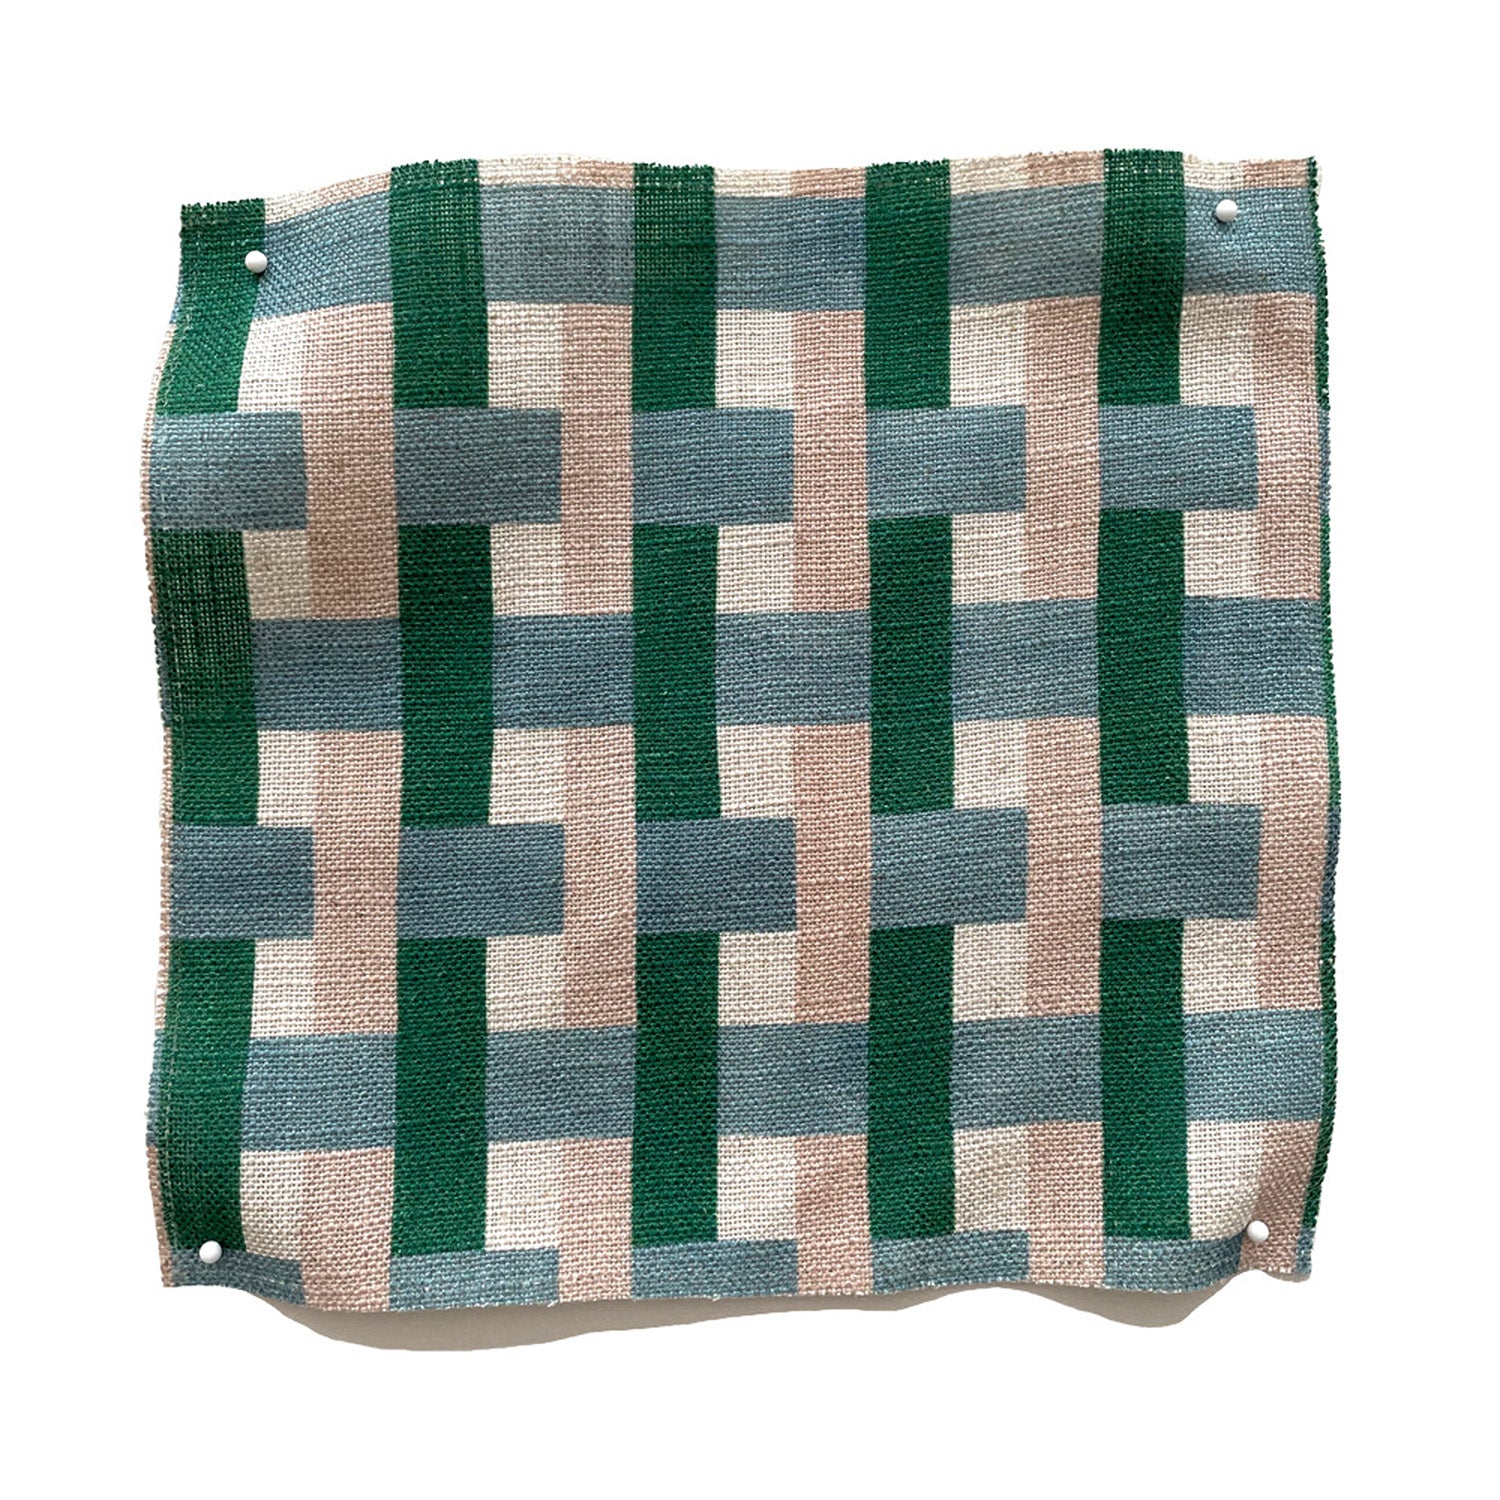 Square fabric swatch in an interlocking checked pattern in shades of blue, green and pink.